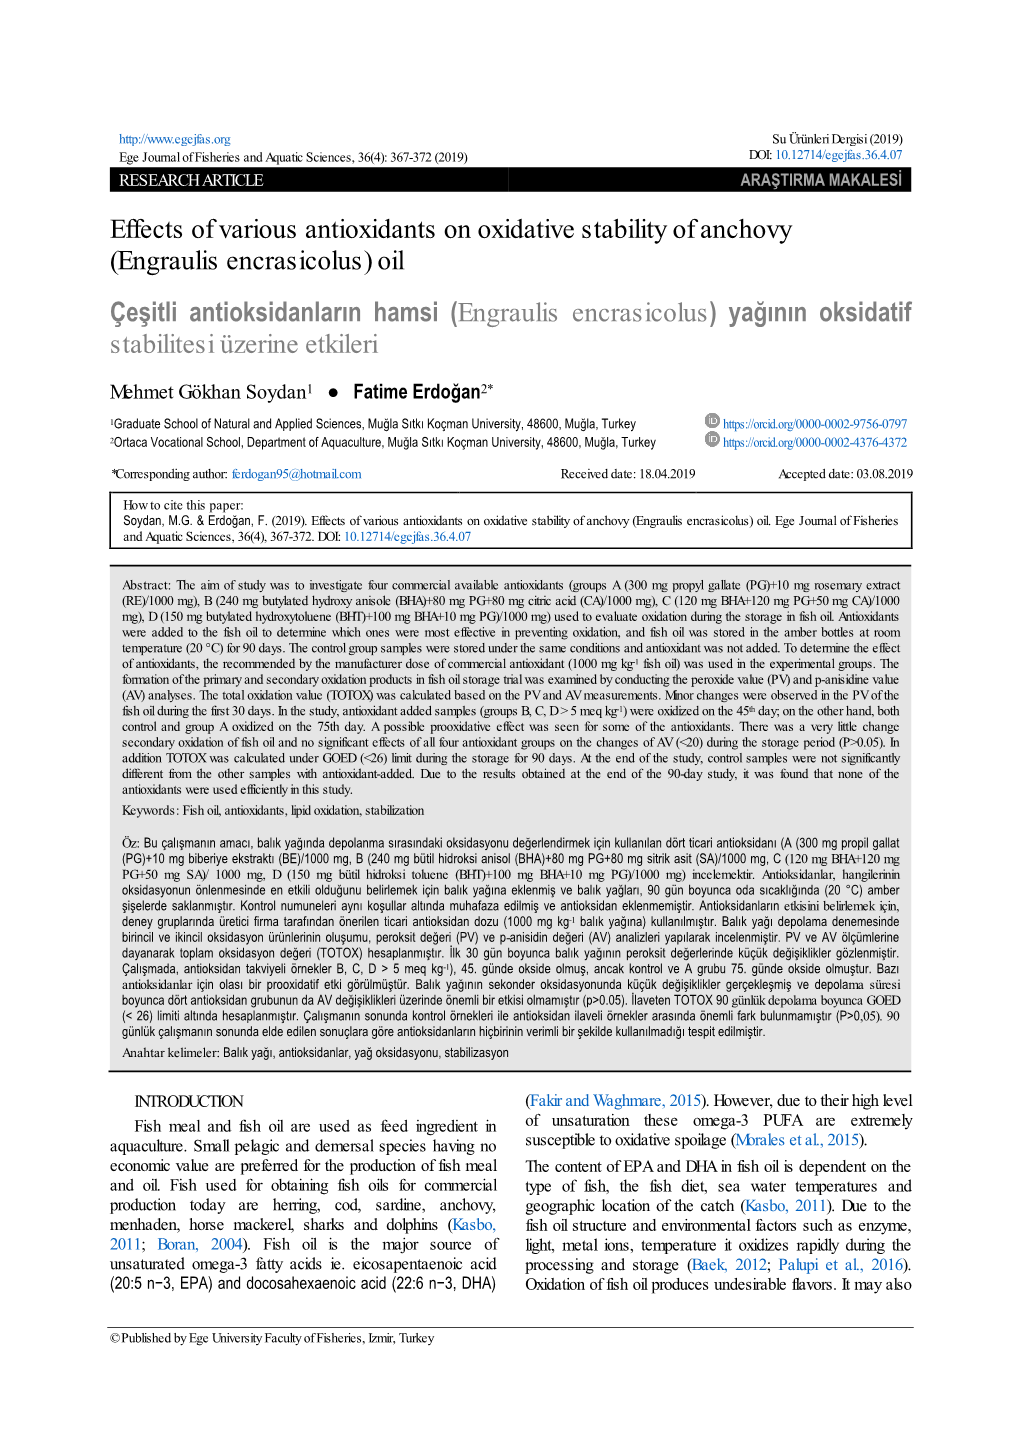 Effects of Various Antioxidants on Oxidative Stability of Anchovy